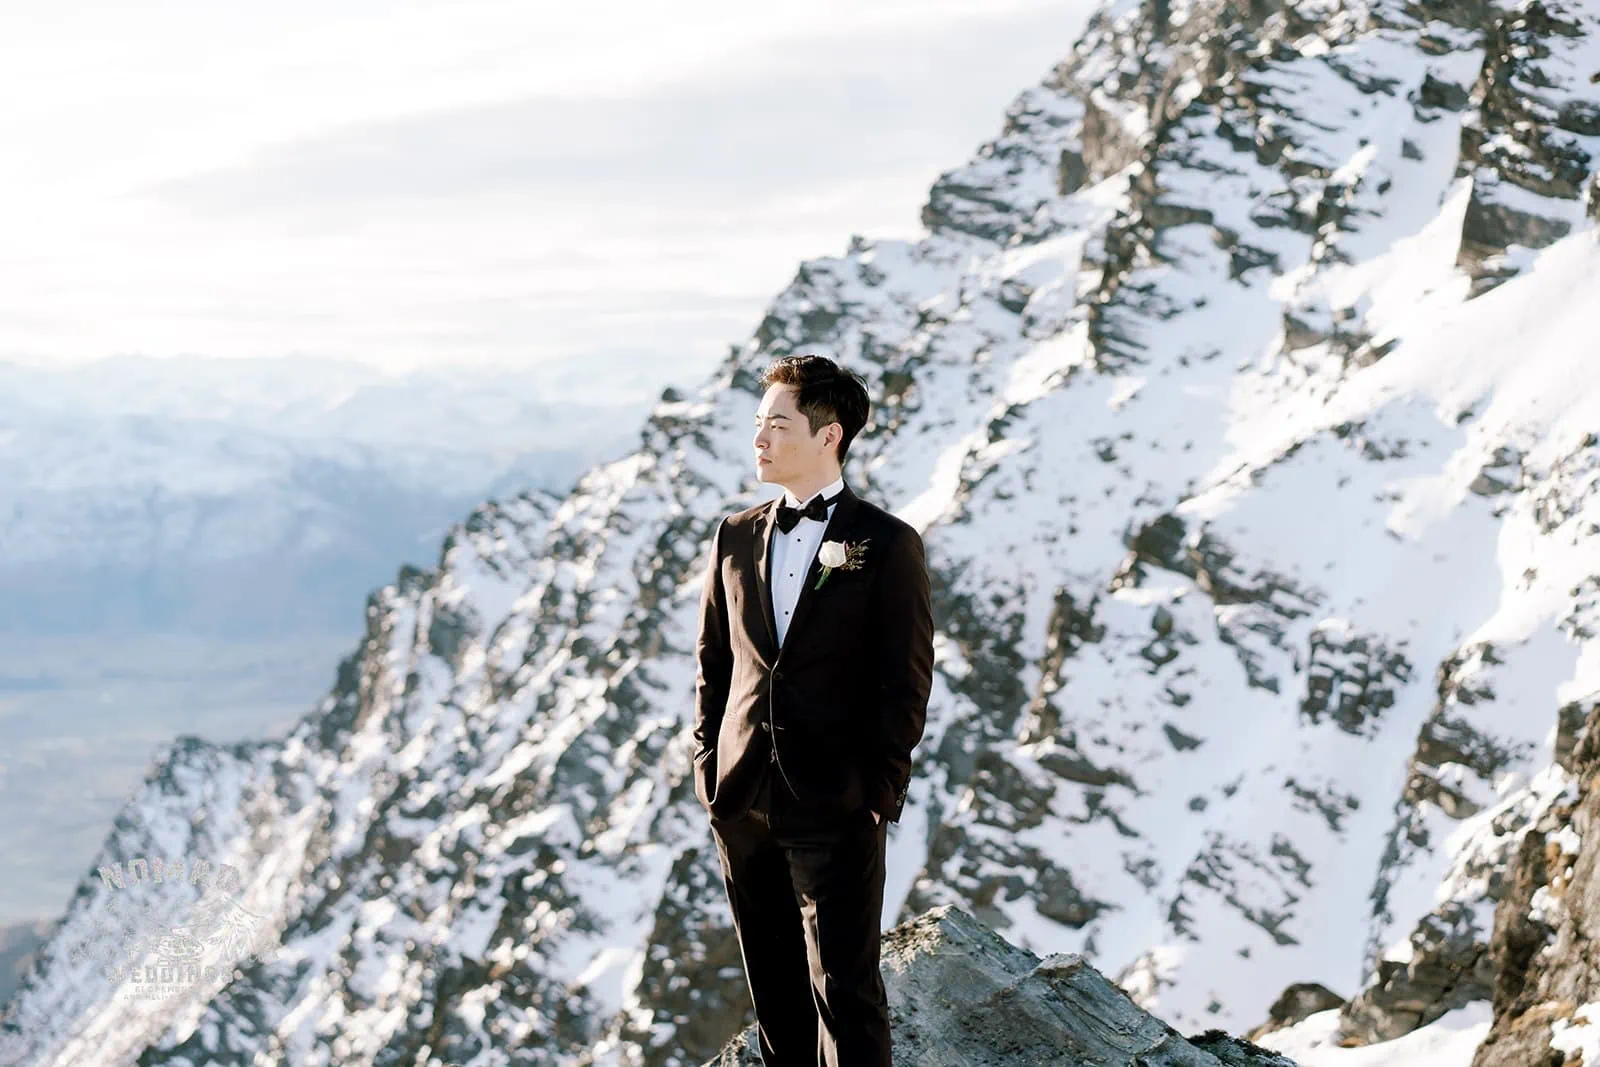 Queenstown New Zealand Elopement Wedding Photographer - A man in a tuxedo stands on top of a snowy mountain during the Bo and Junyi Heli Pre Wedding Shoot.